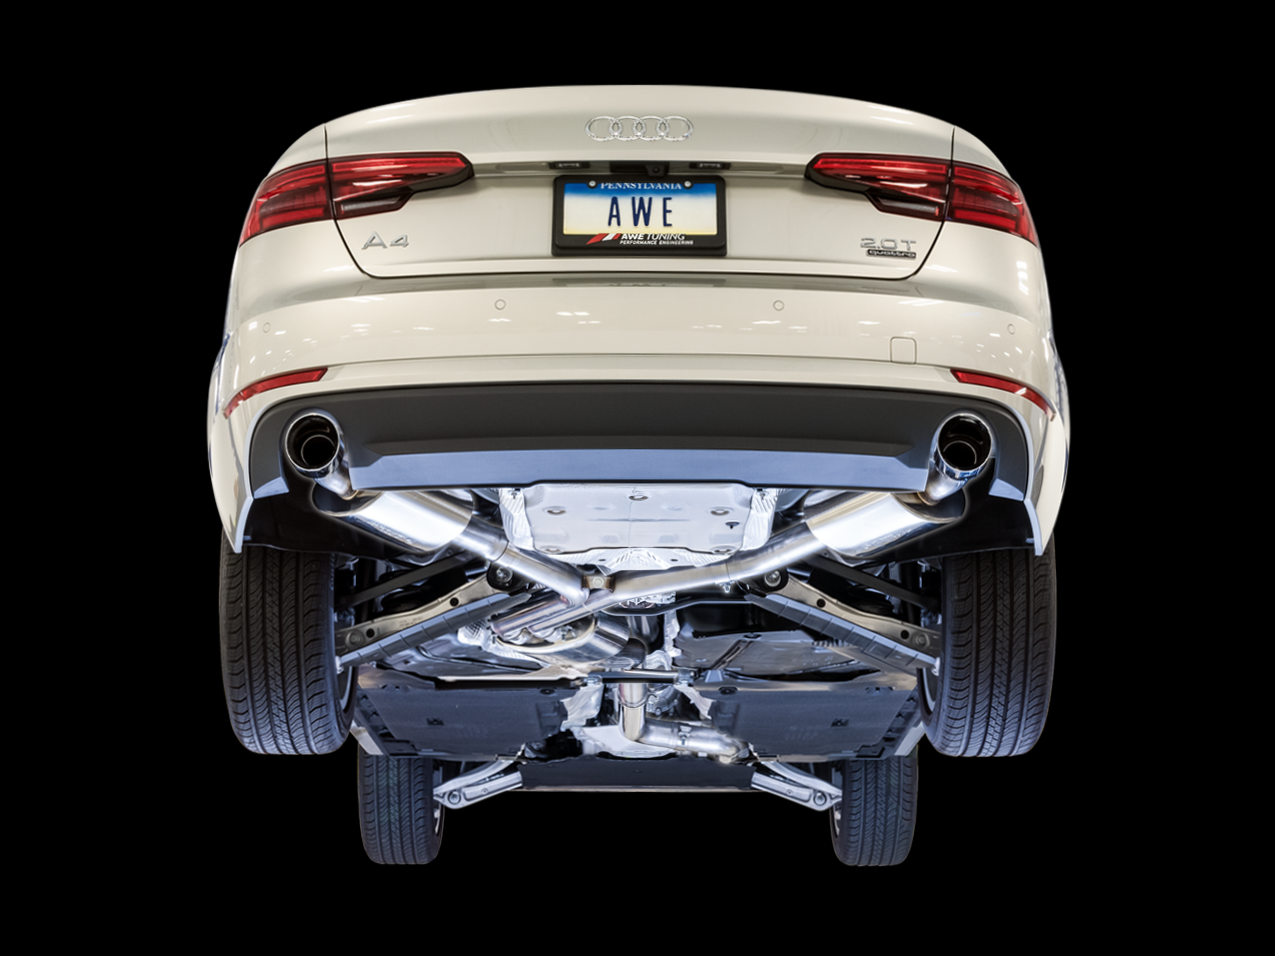 AWE Touring Edition Exhaust for B9 A4, Dual Outlet - Chrome Silver Tips (includes DP)